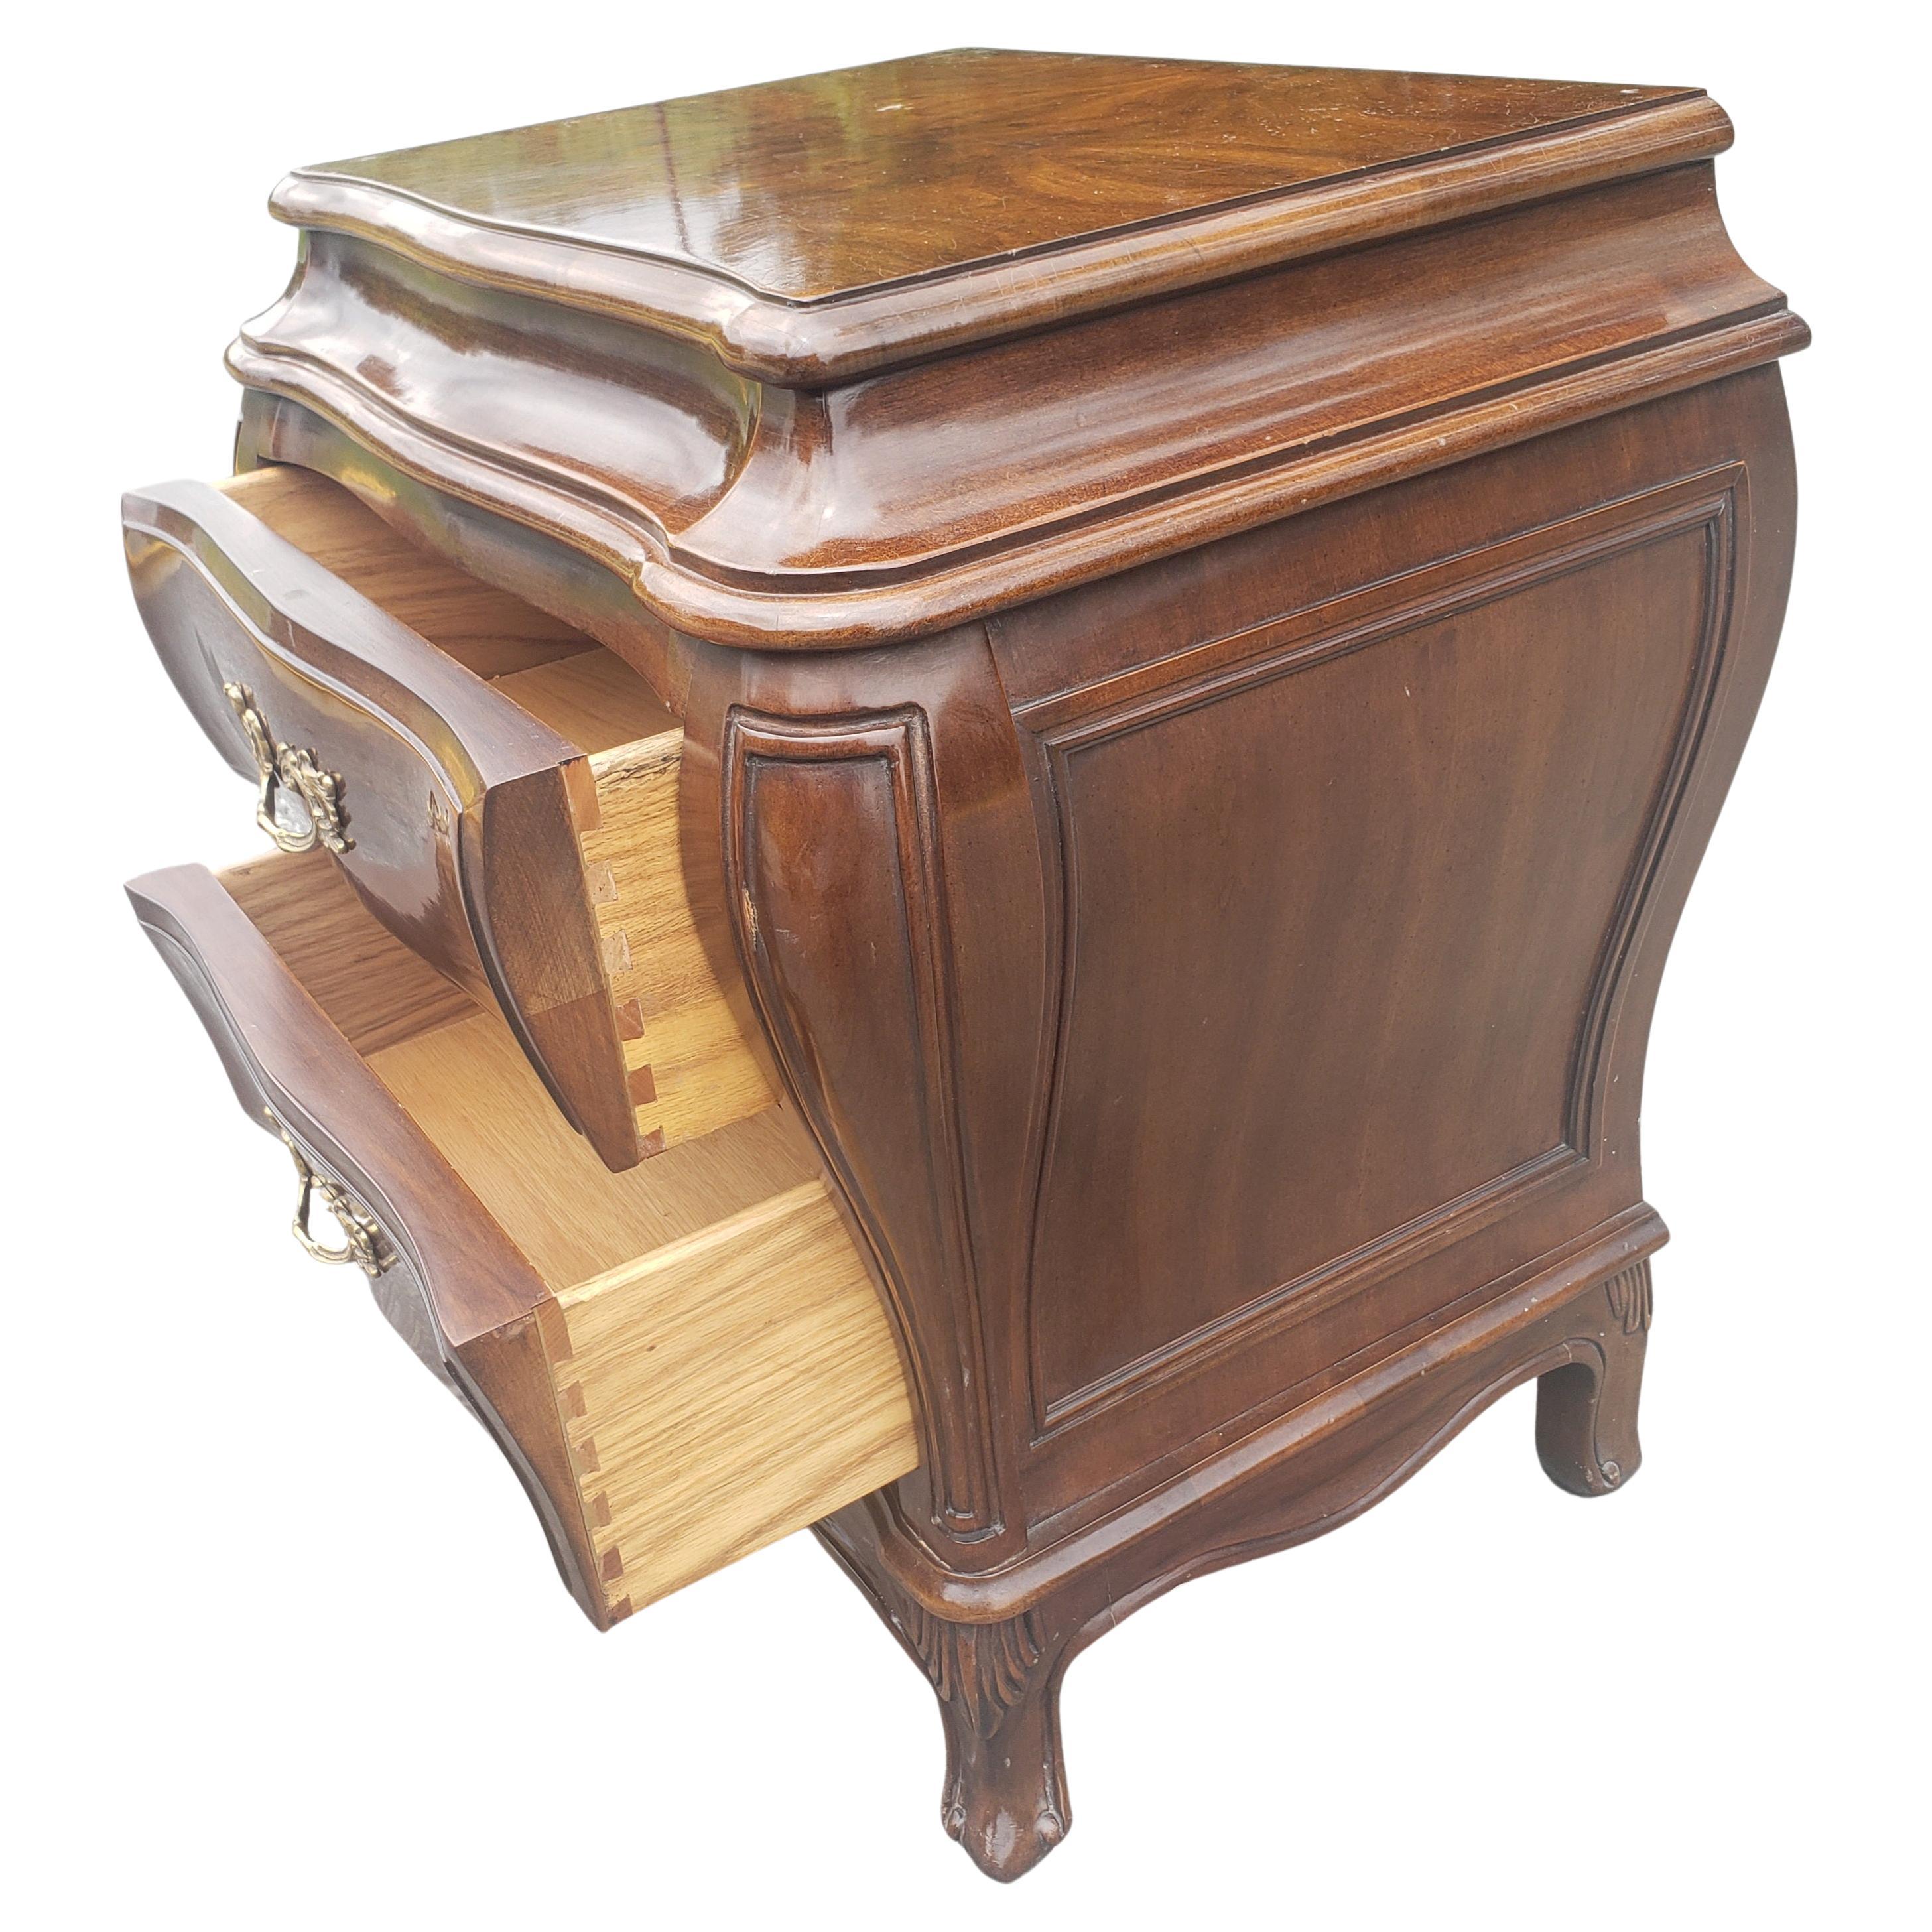 20th Century Karges Furniture Louis XVI Mahogany Bombe Nightstands Commodes, a Pair For Sale